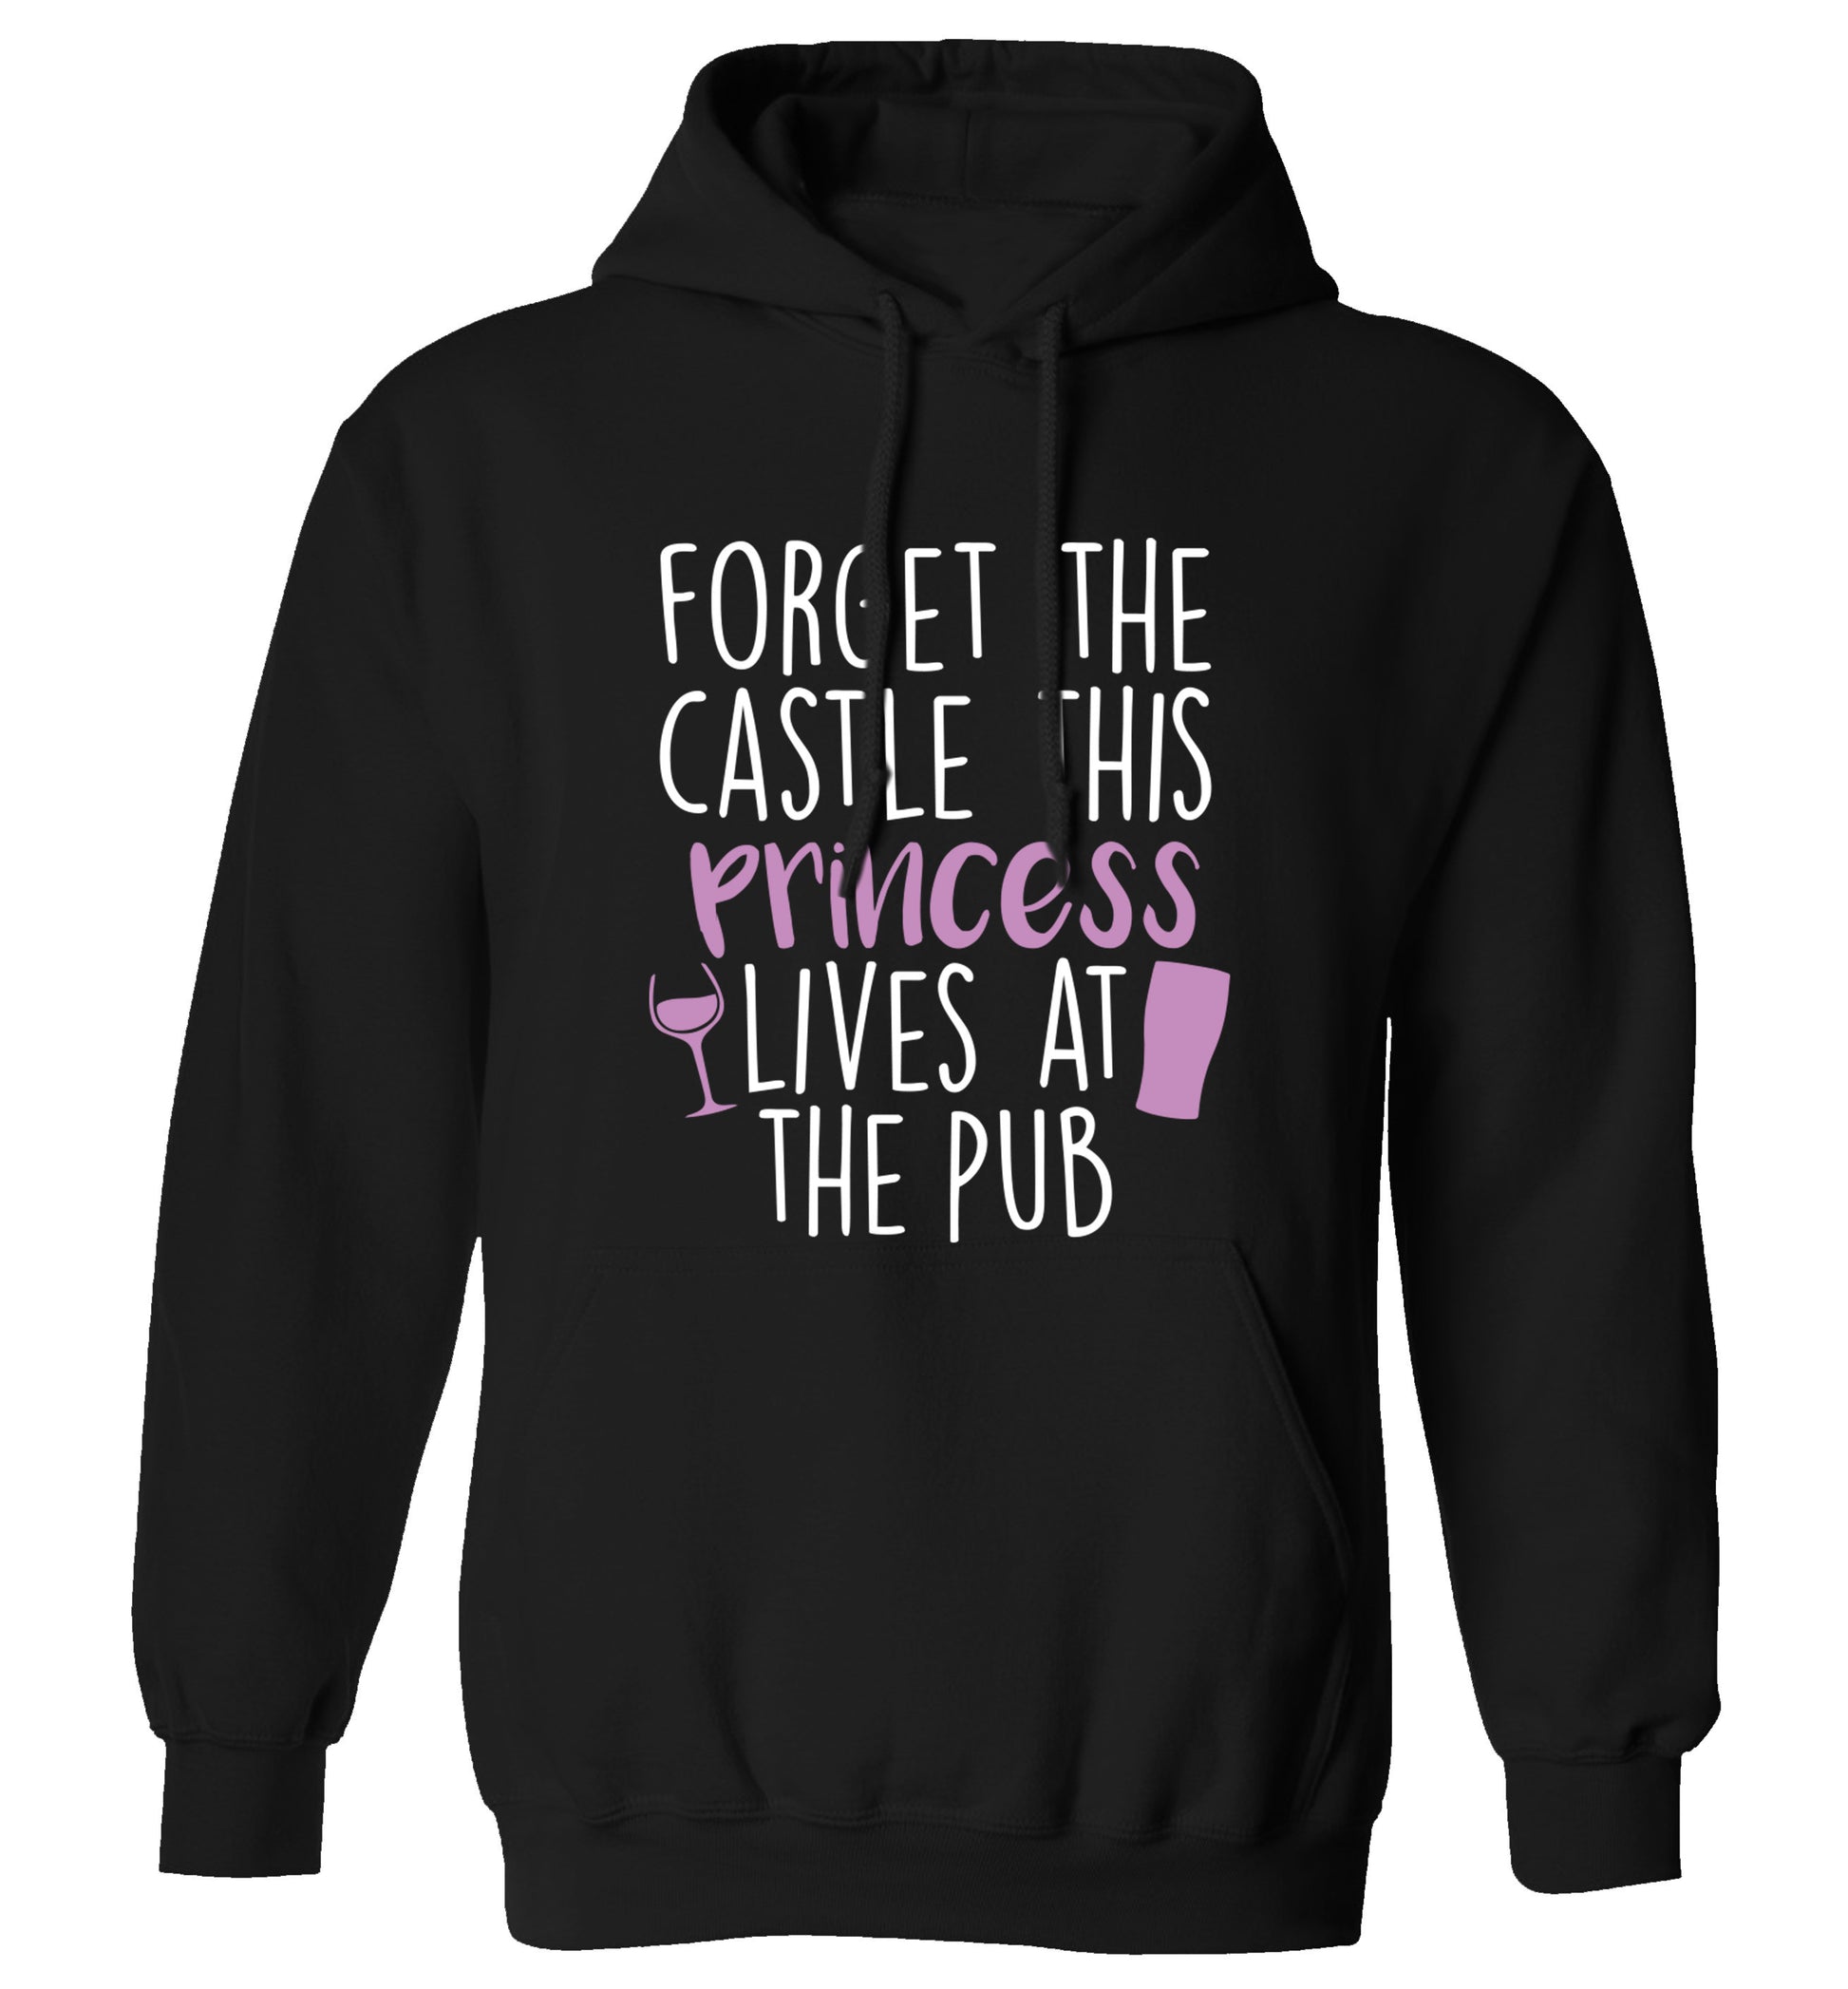 Forget the castle this princess lives at the pub adults unisex black hoodie 2XL